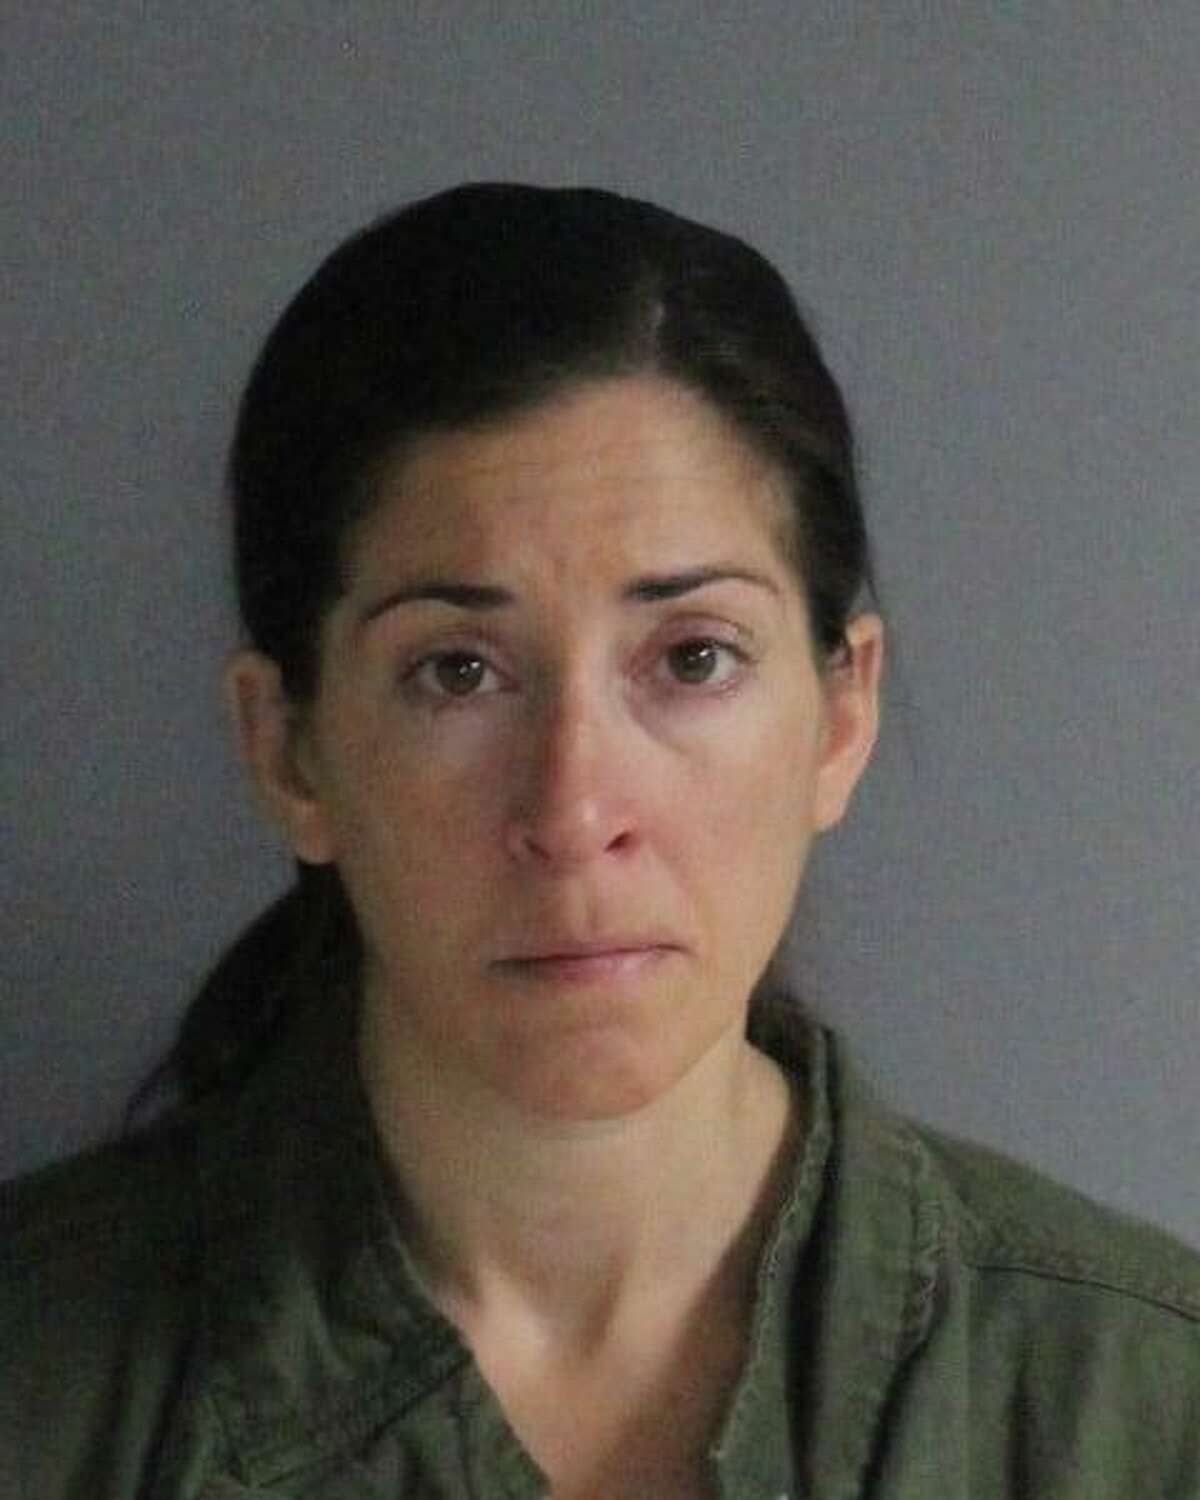 Amanda Mark, 36, was charged with evasion of responsibility in operation of a motor vehicle resulting in death Tuesday.